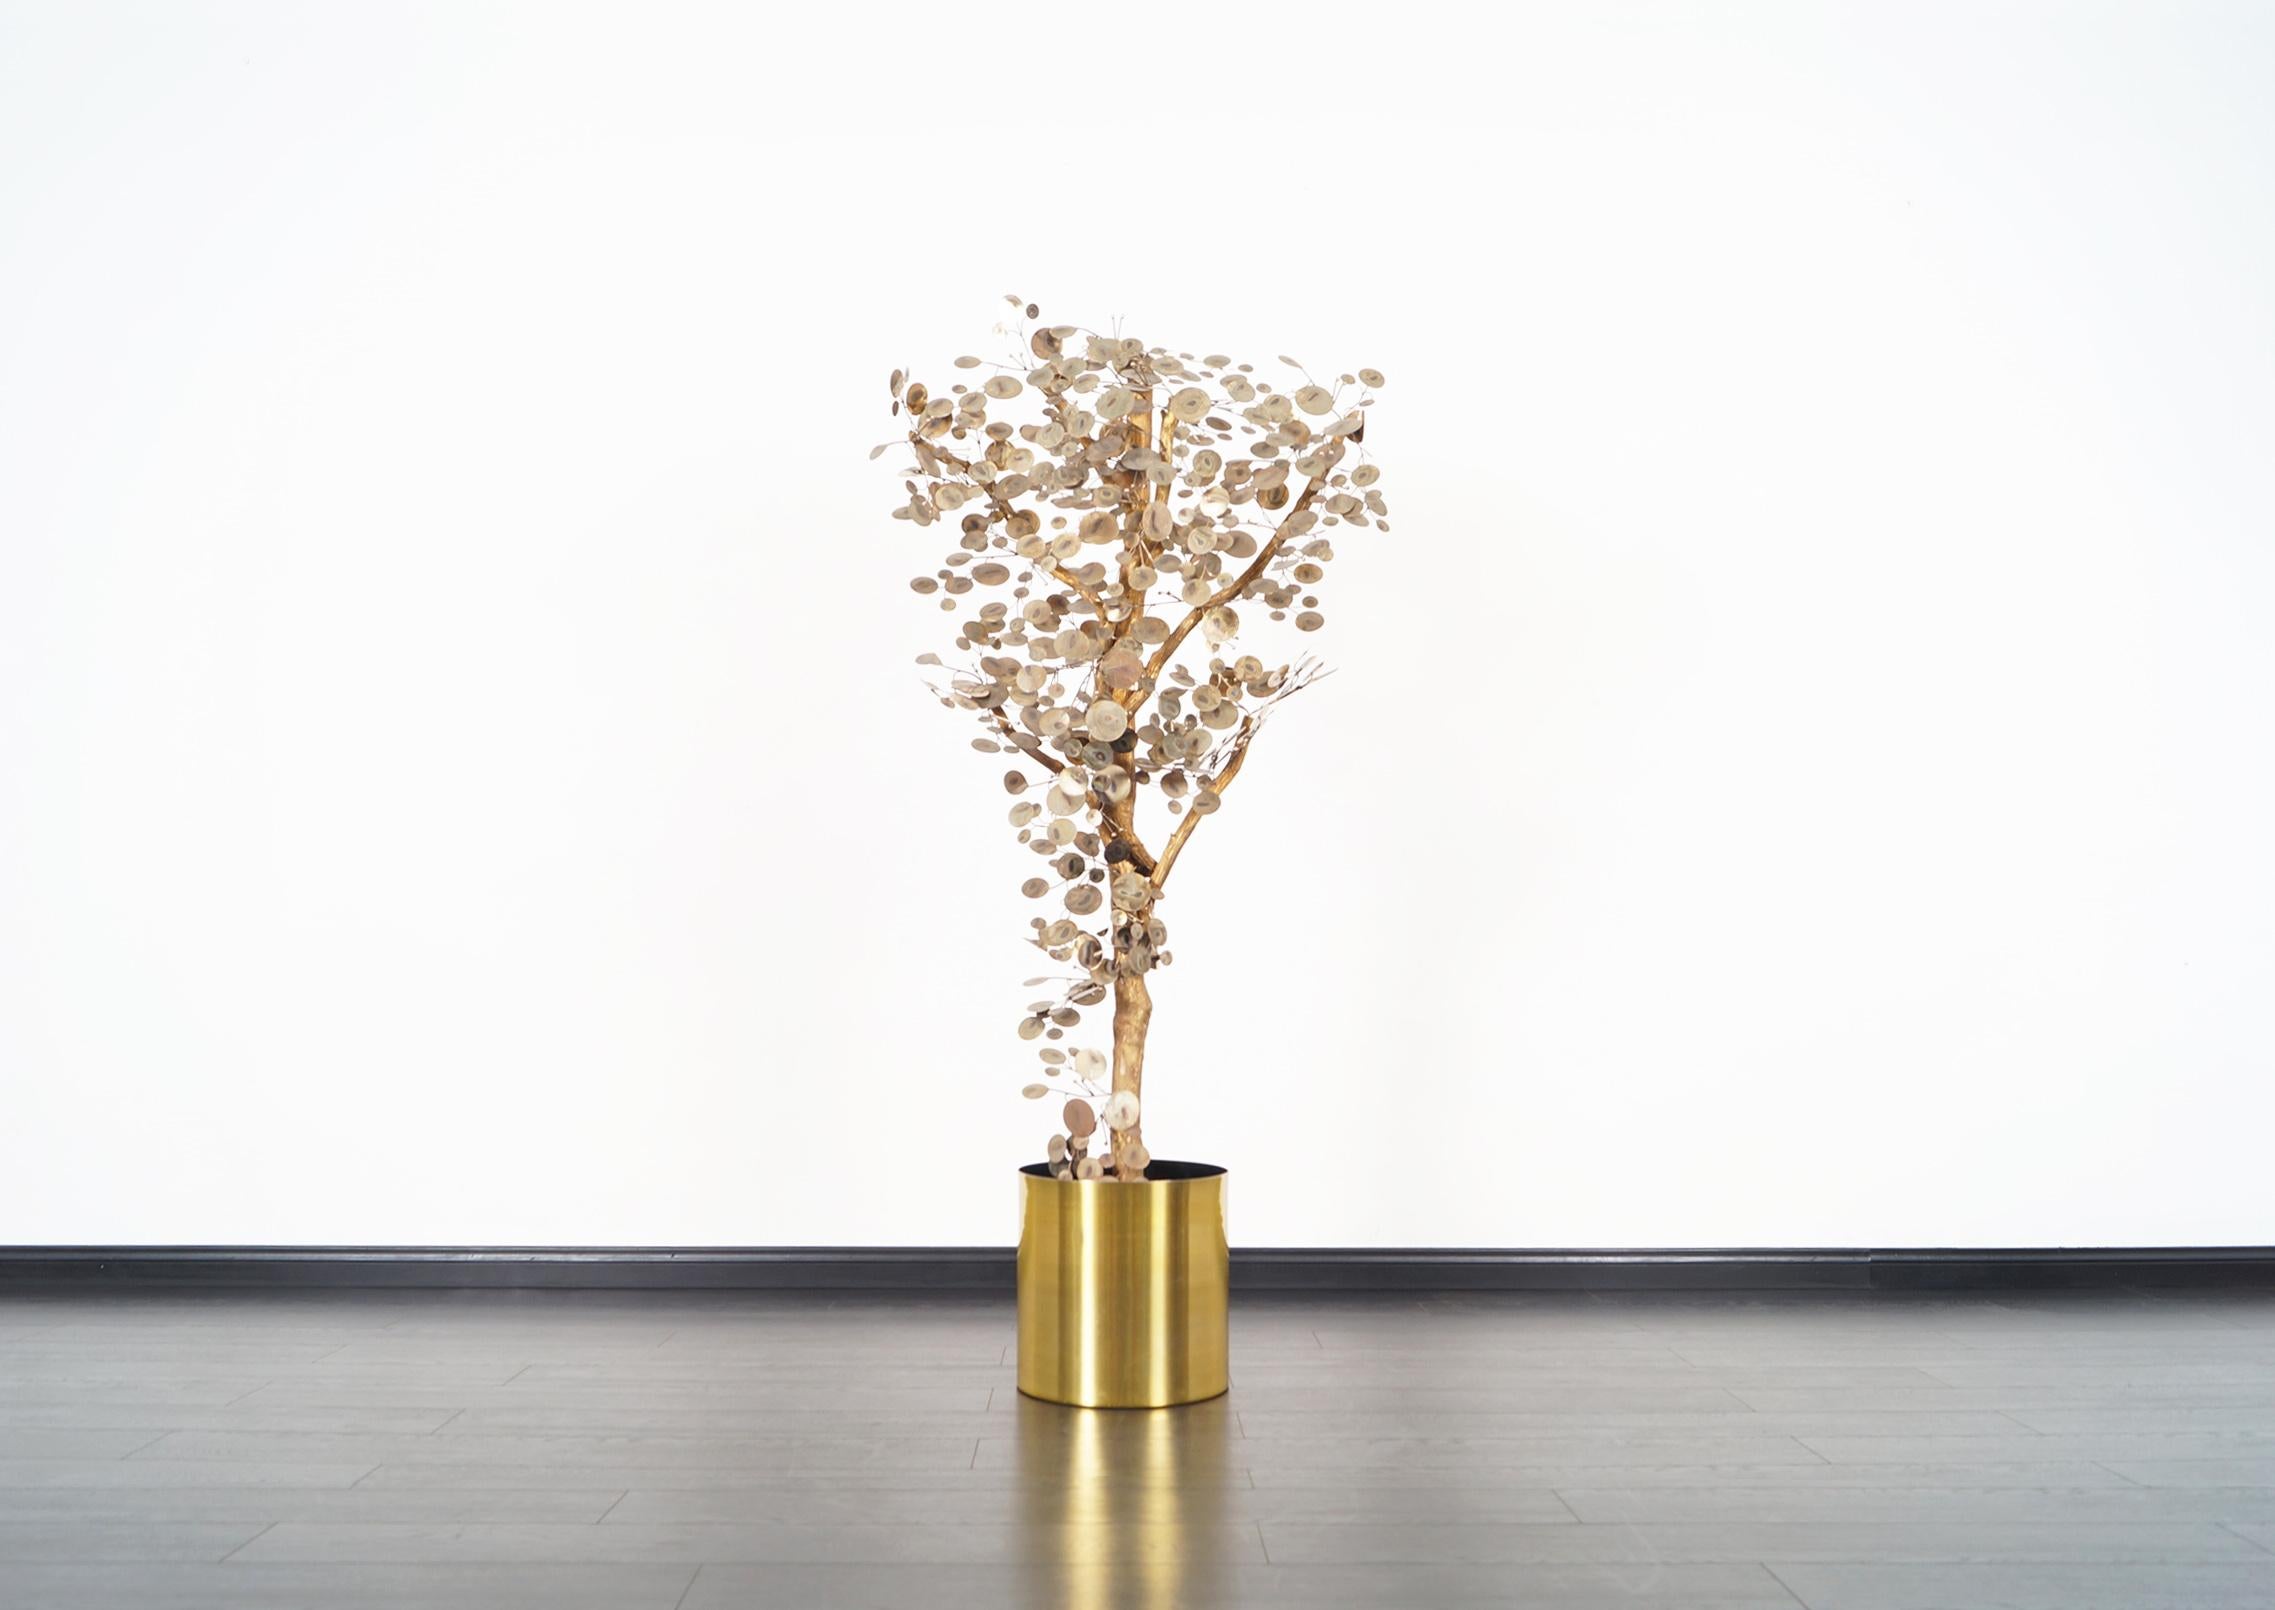 Stunning vintage “Raindrops” tree sculpture by Curtis Jere in United States, circa 1970s. This elegant piece has a natural tree branch design, which has been decorated with elegant metal discs details in a brass-plated finish that gives the form of